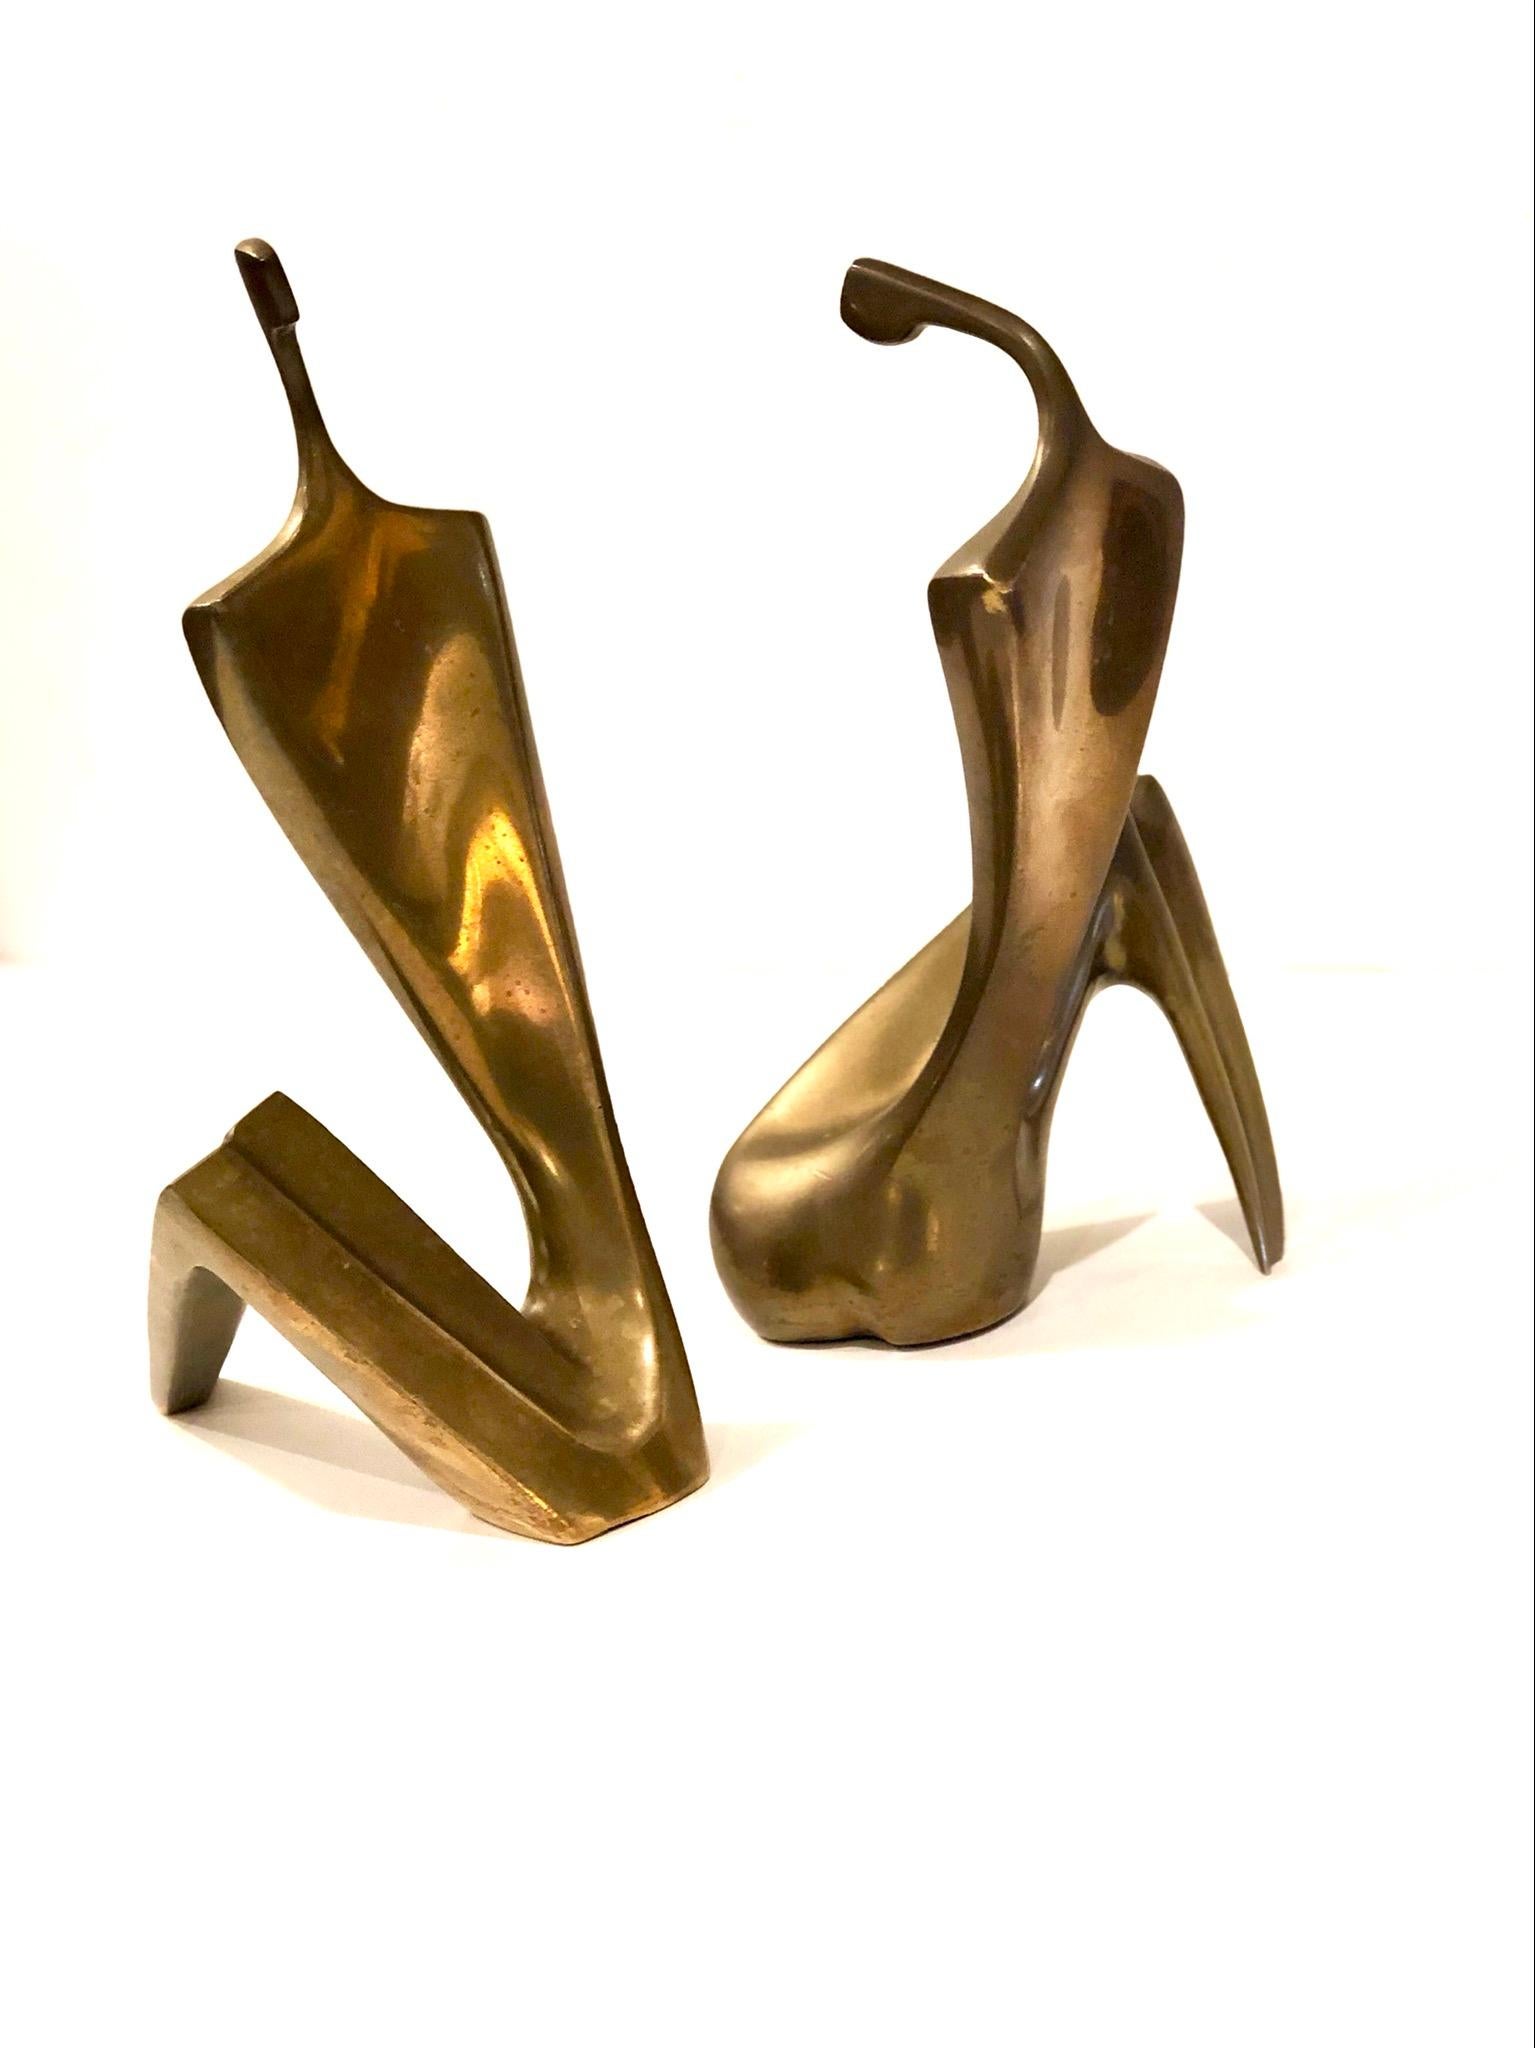 20th Century Signed and Numbered Patinated Bronze Sculptures by Itzik Ben Shalom